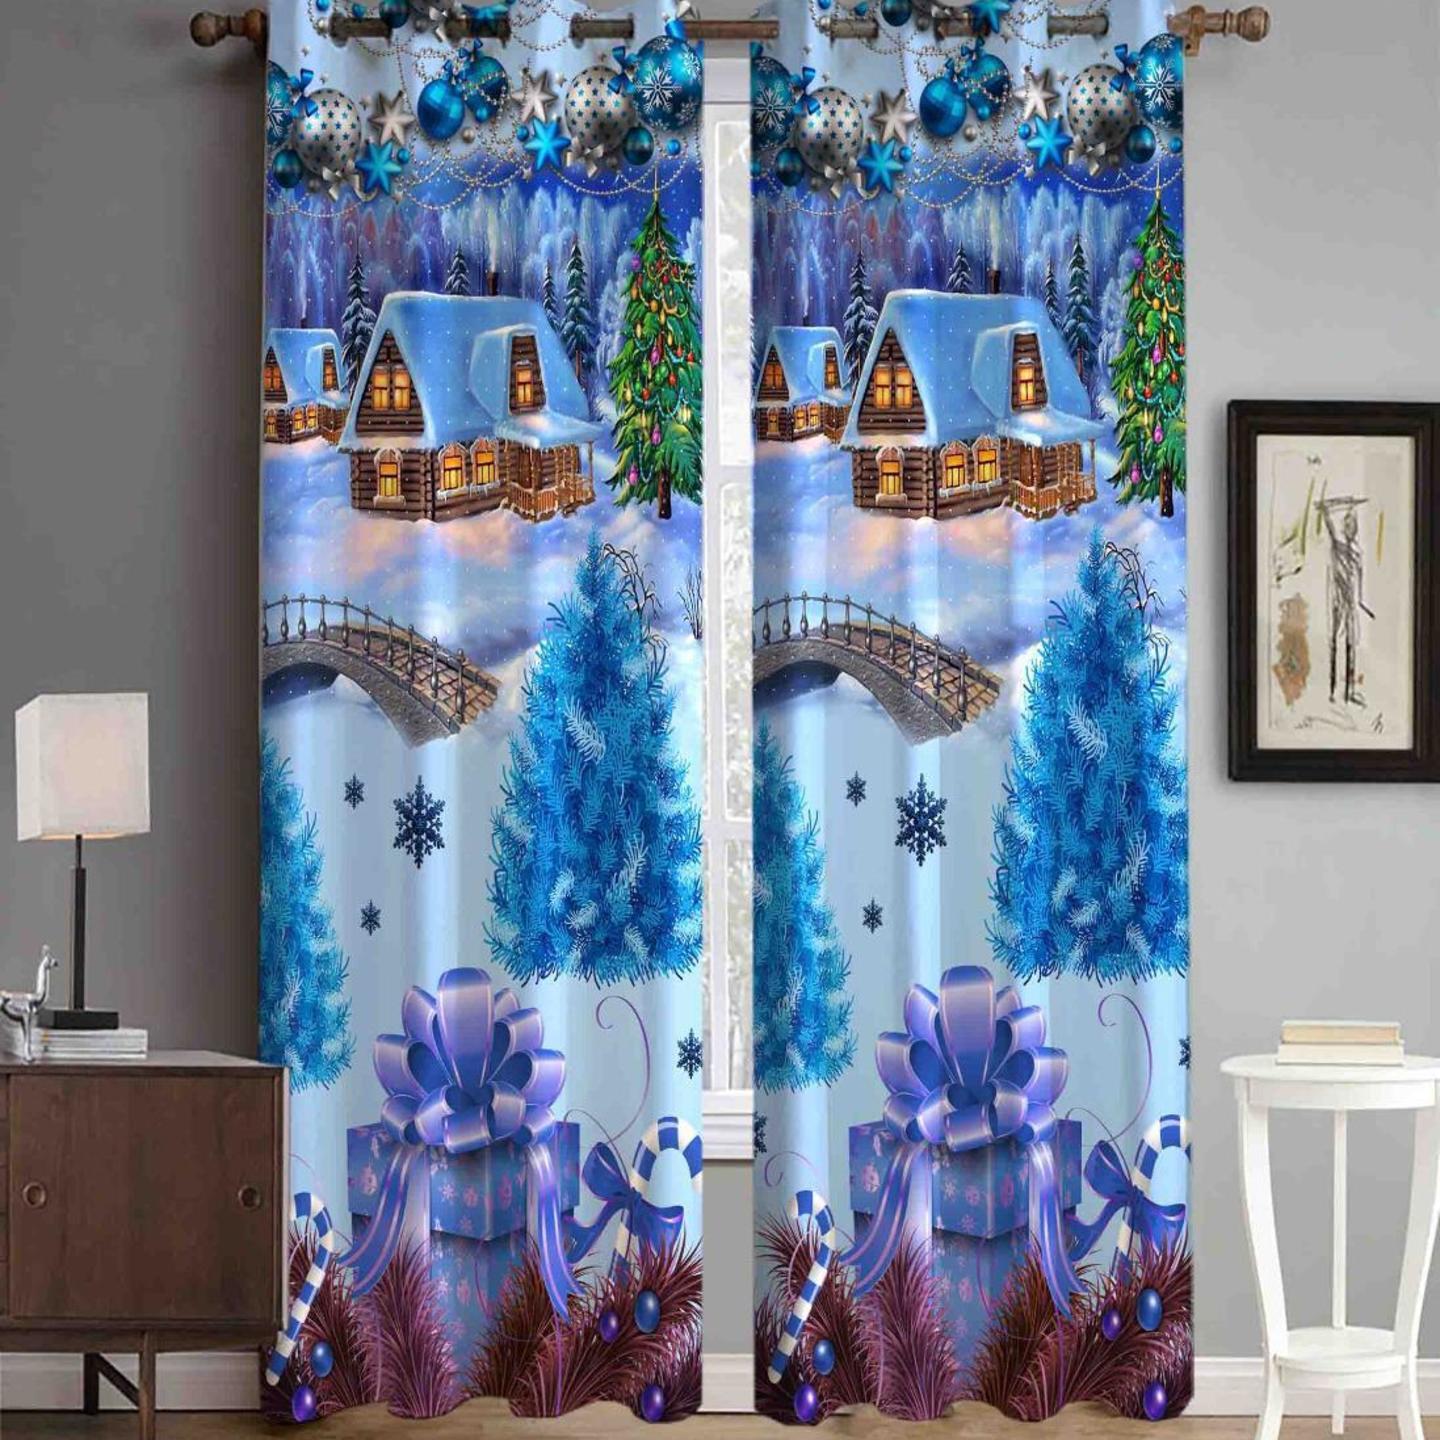 Handtex Home Heavy Fabric Digital Printed Curtain for Kids Room Decorative Curtains for Living Room Bedroom Home Office Decor Set of 2 4x9